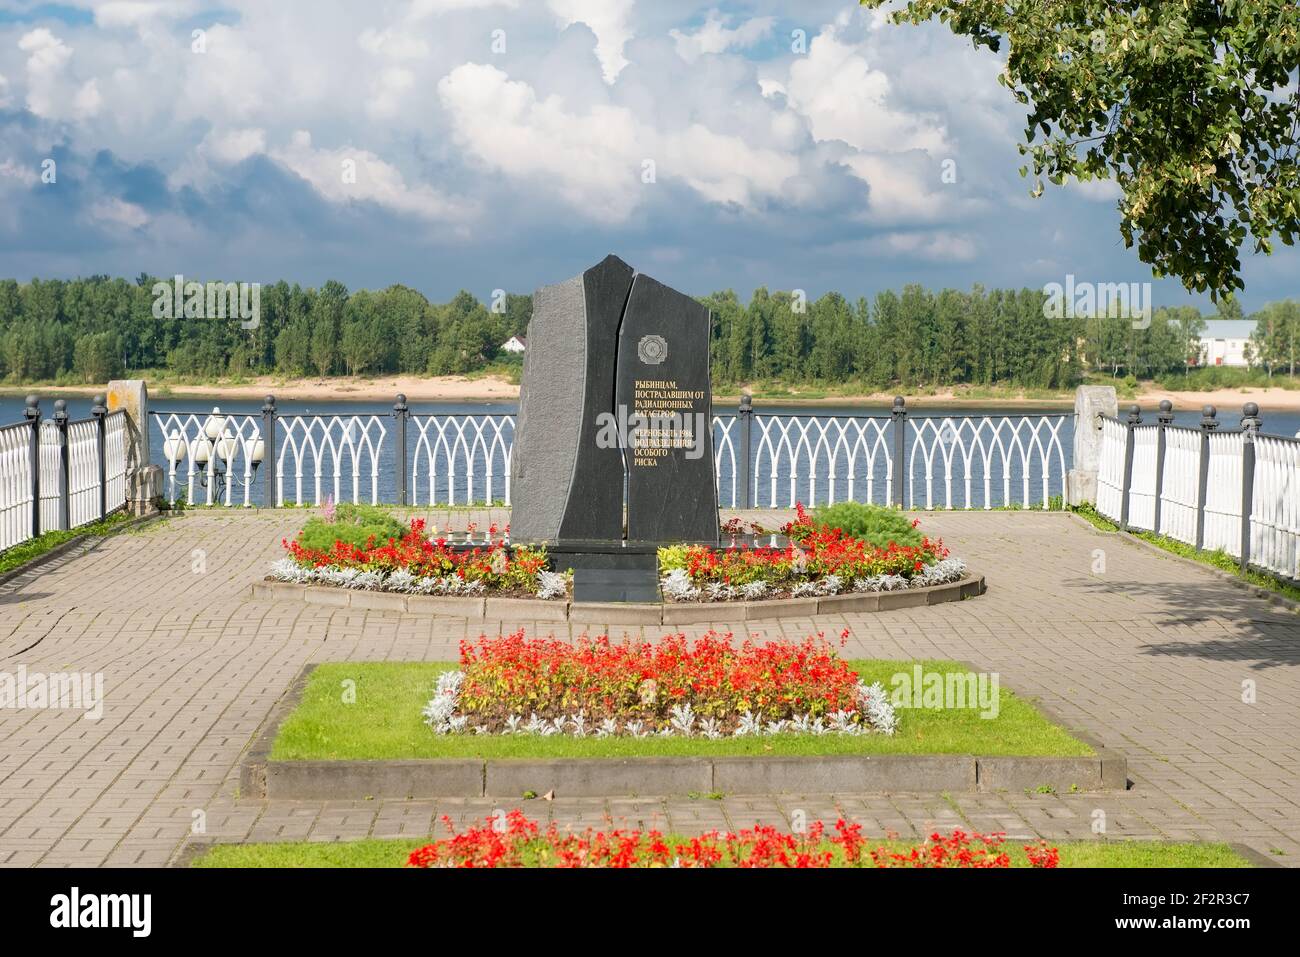 RYBINSK, RUSSIA / AUGUST 15,2020: Monument to victims of radiation catastrophes on the background of the cloudy sky on a summer day, Nikolsky Boulevar Stock Photo